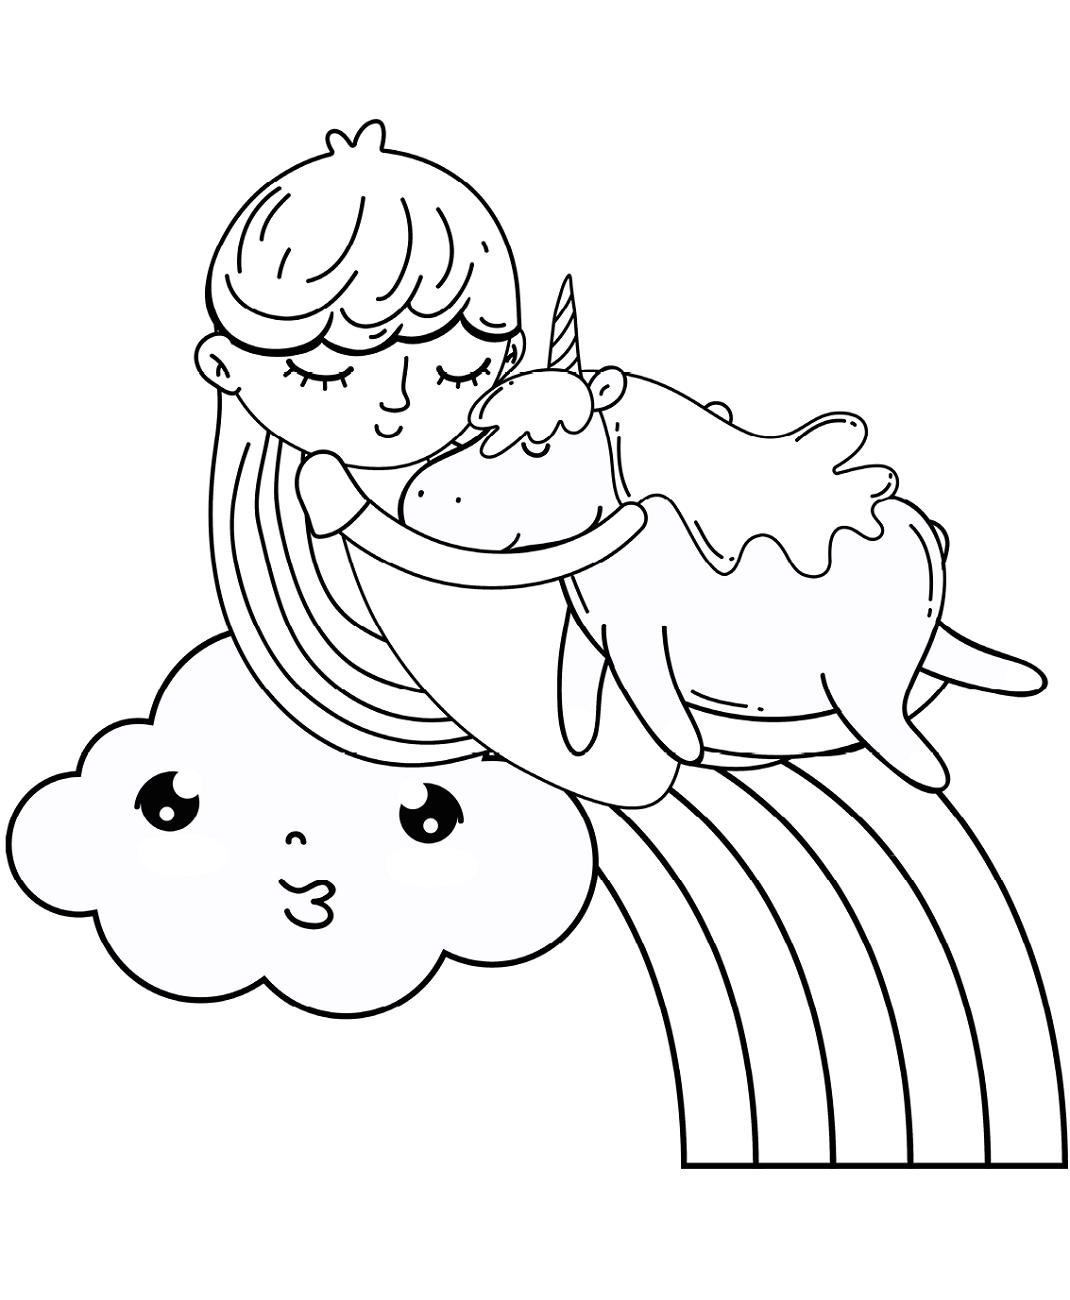 Girl Sleeping With Unicorn Coloring Page - Free Printable Coloring Pages  for Kids